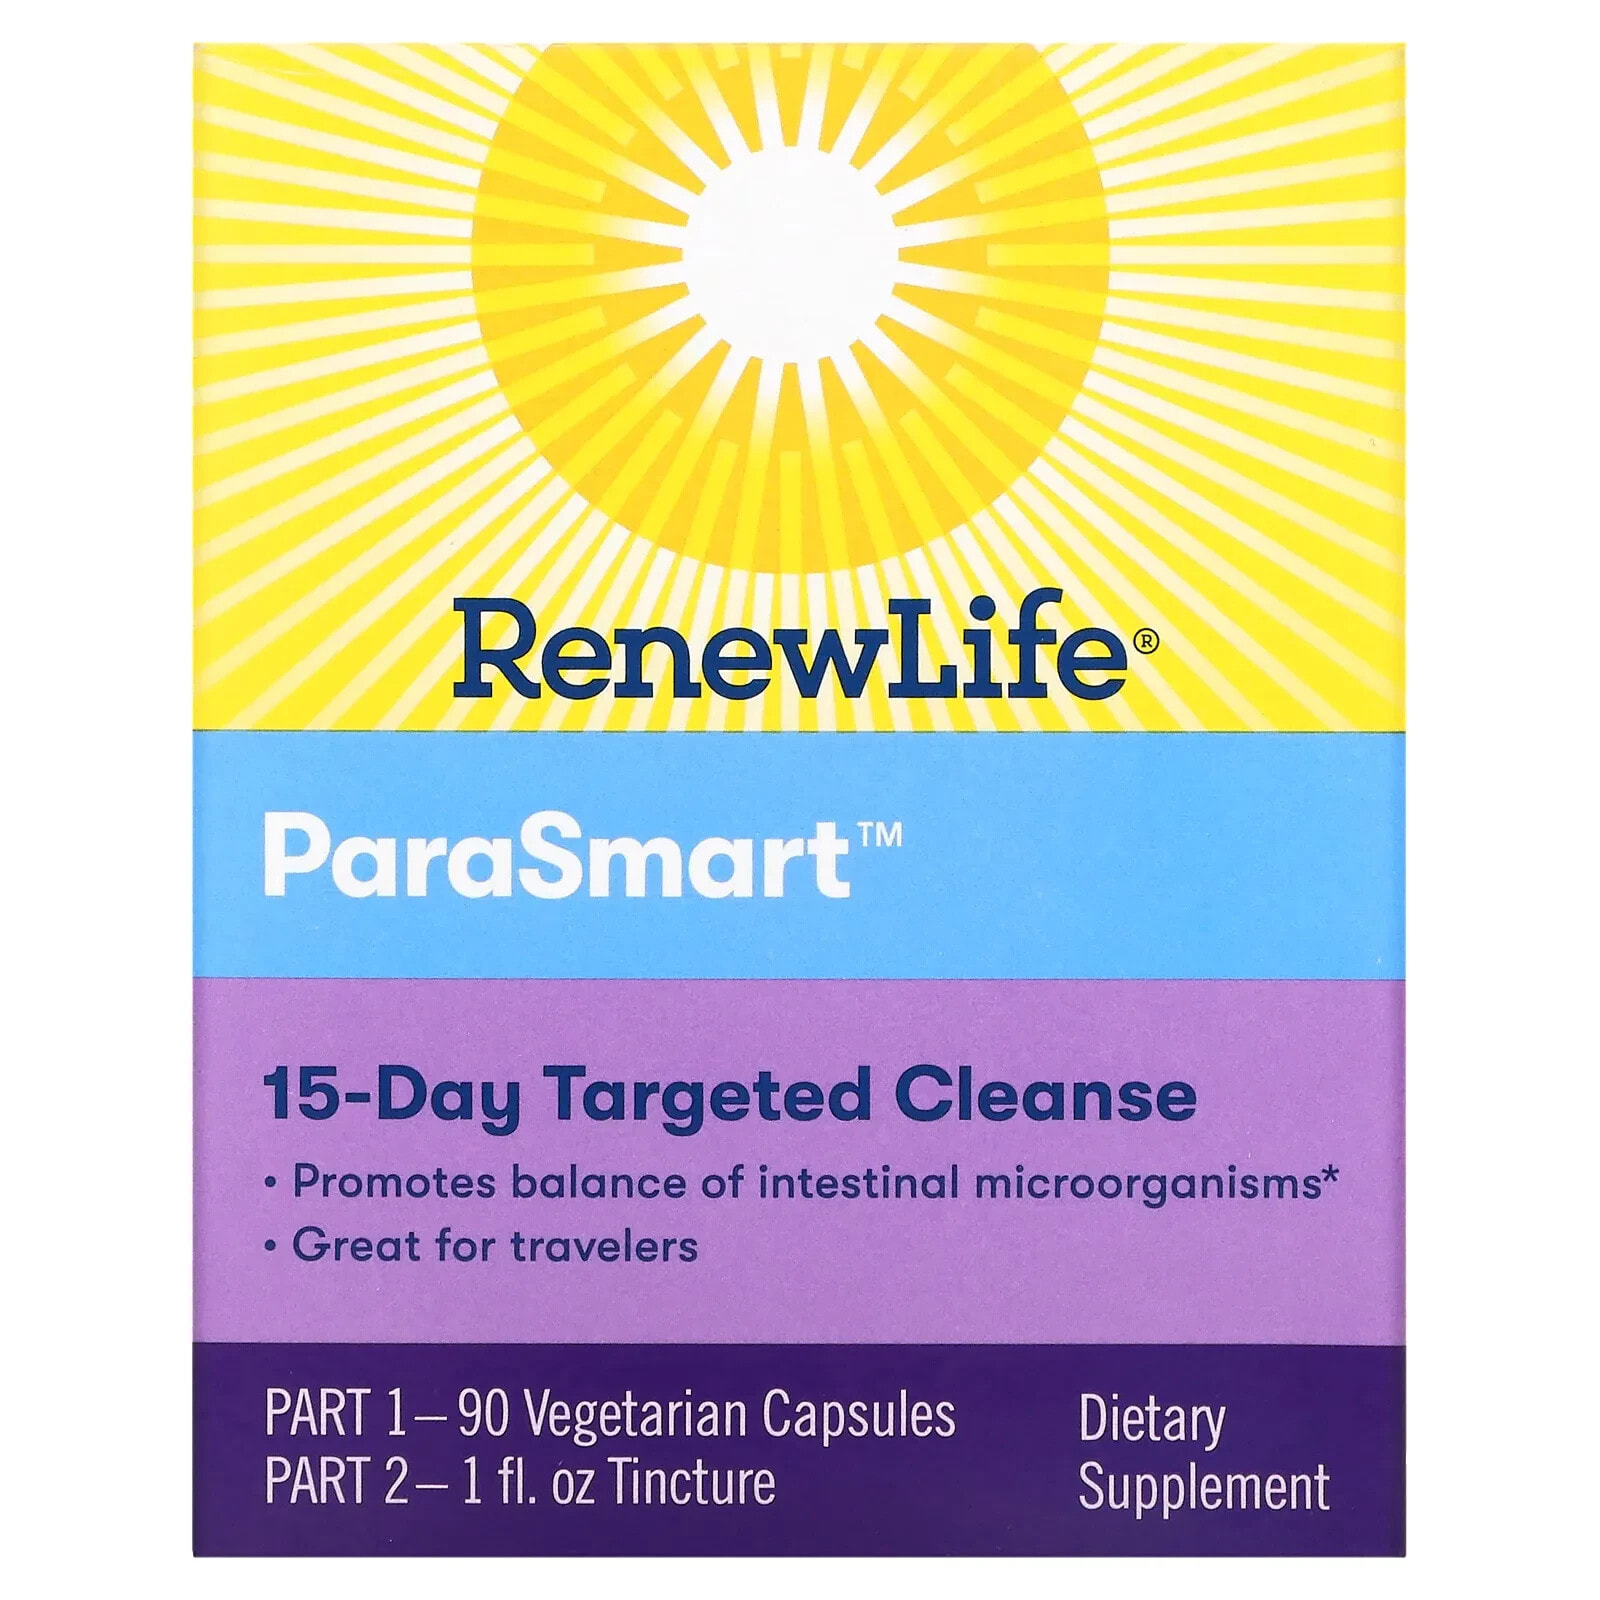 ParaSmart Cleanse, 14-Day Targeted Cleanse, 2-Part